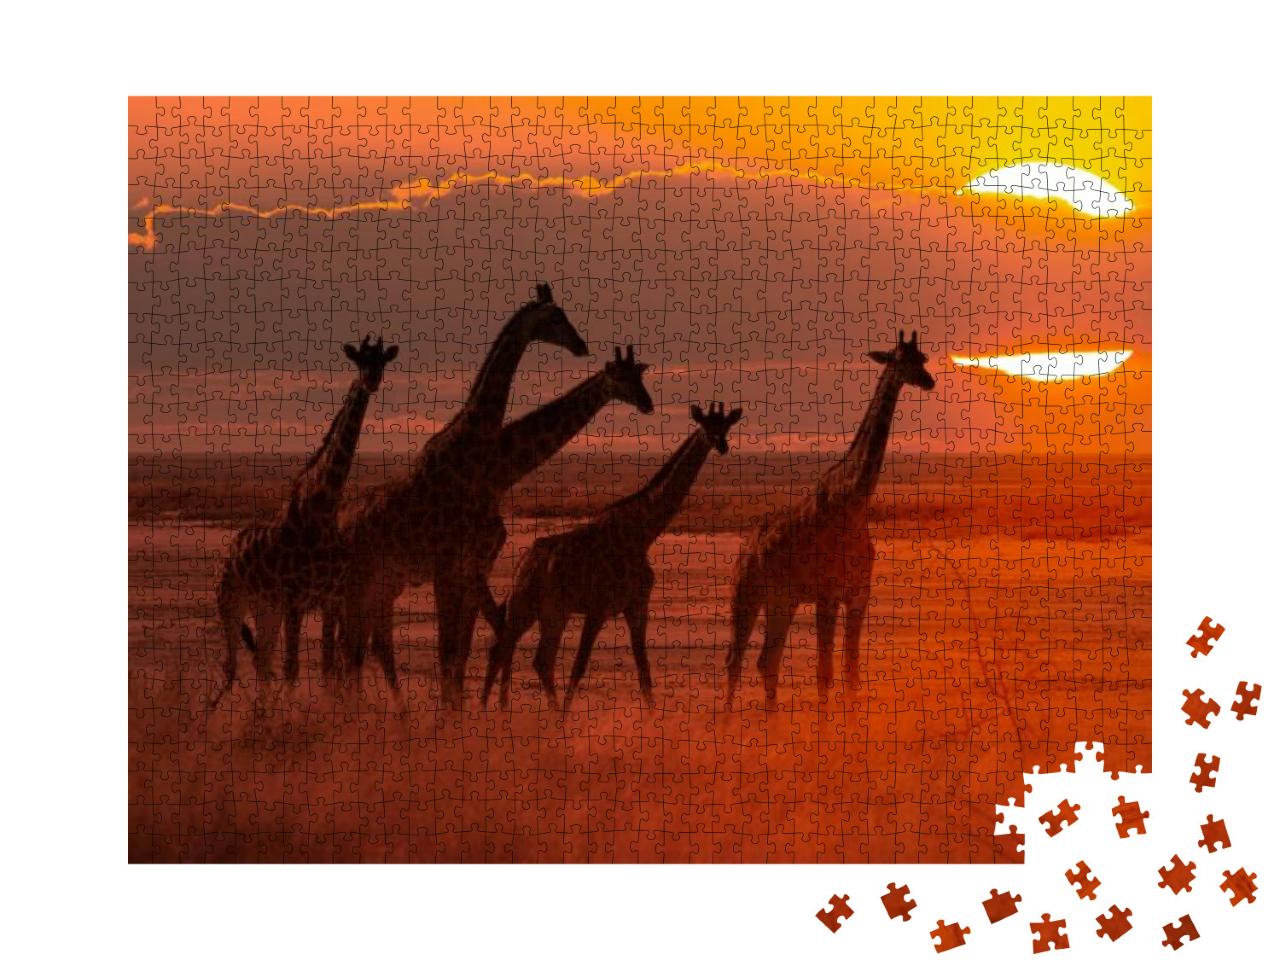 Moody Sunset in African Savanna with a Giraffe Herd, Conc... Jigsaw Puzzle with 1000 pieces